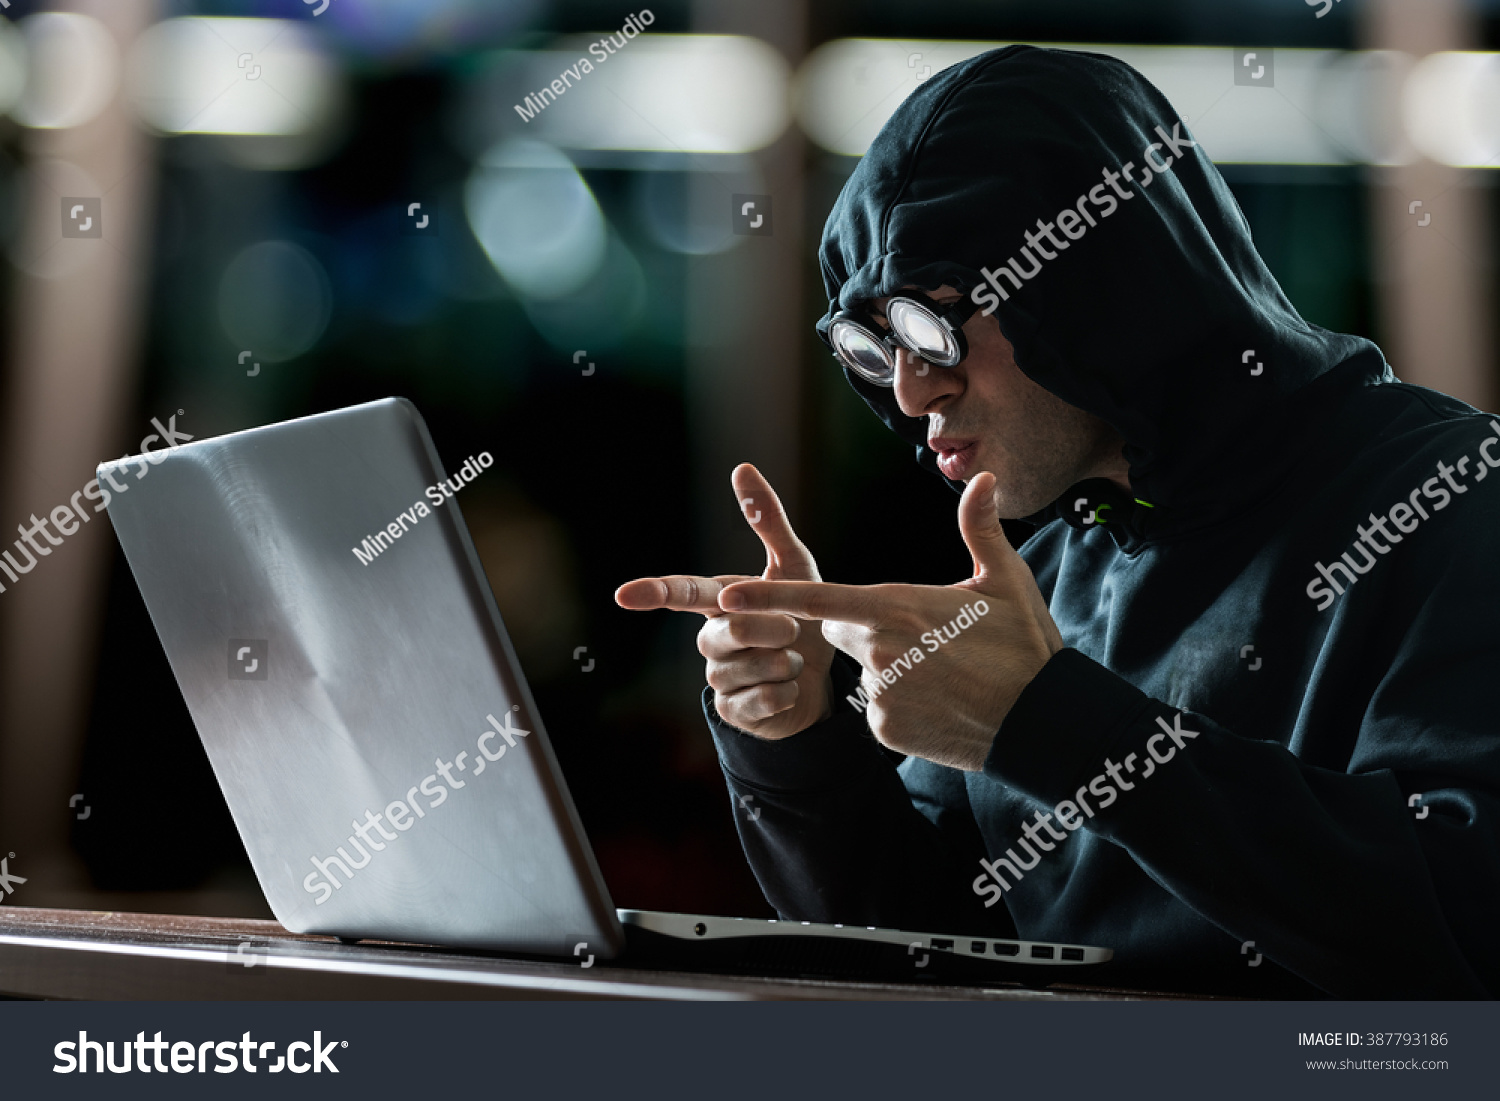 Hacker In Front Of His Computer Stock Photo 387793186 ...